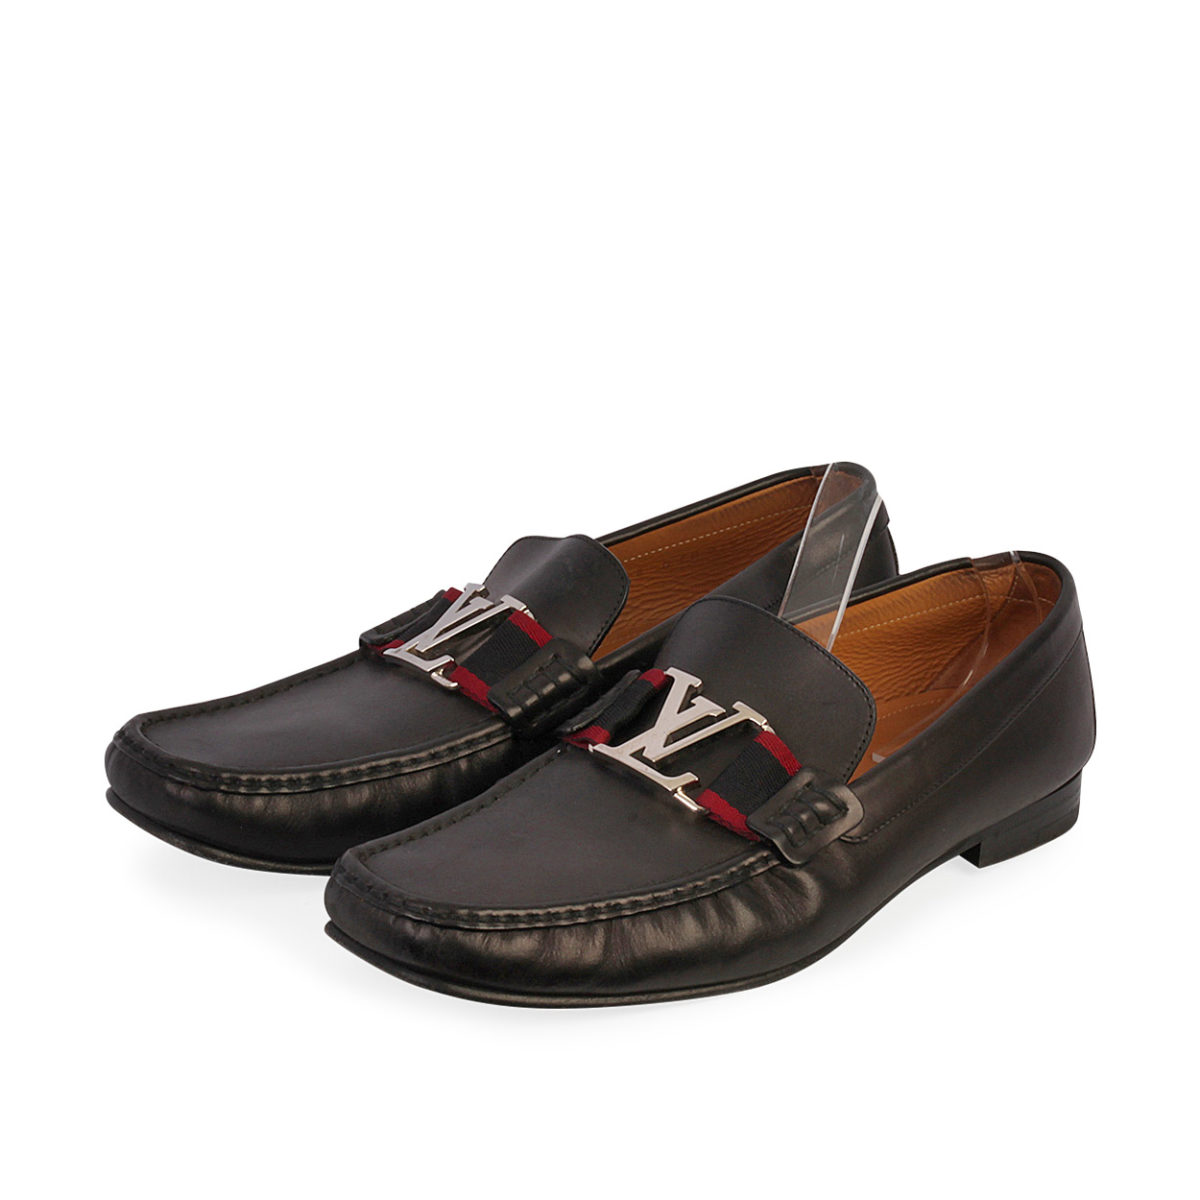 Loafers Louis Vuitton Womens Keweenaw Bay Indian Community